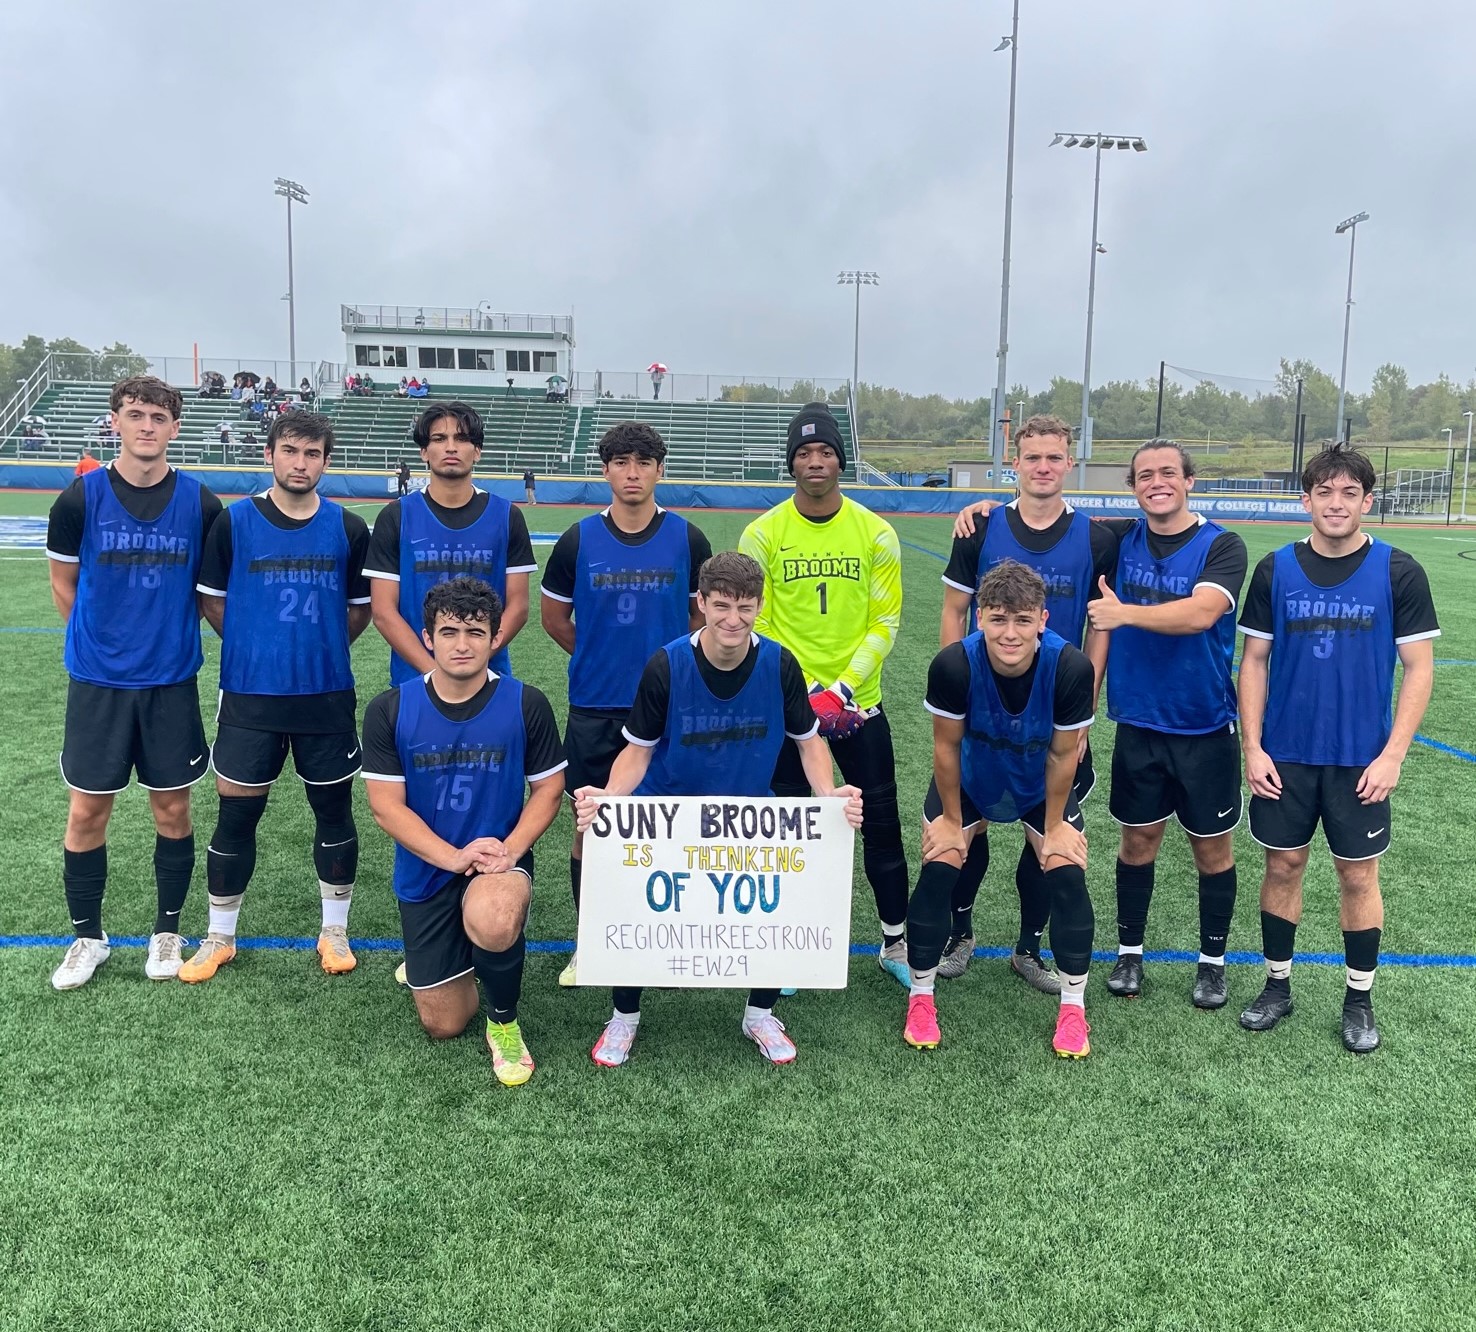 Team holding sign in support of Ethan Walker